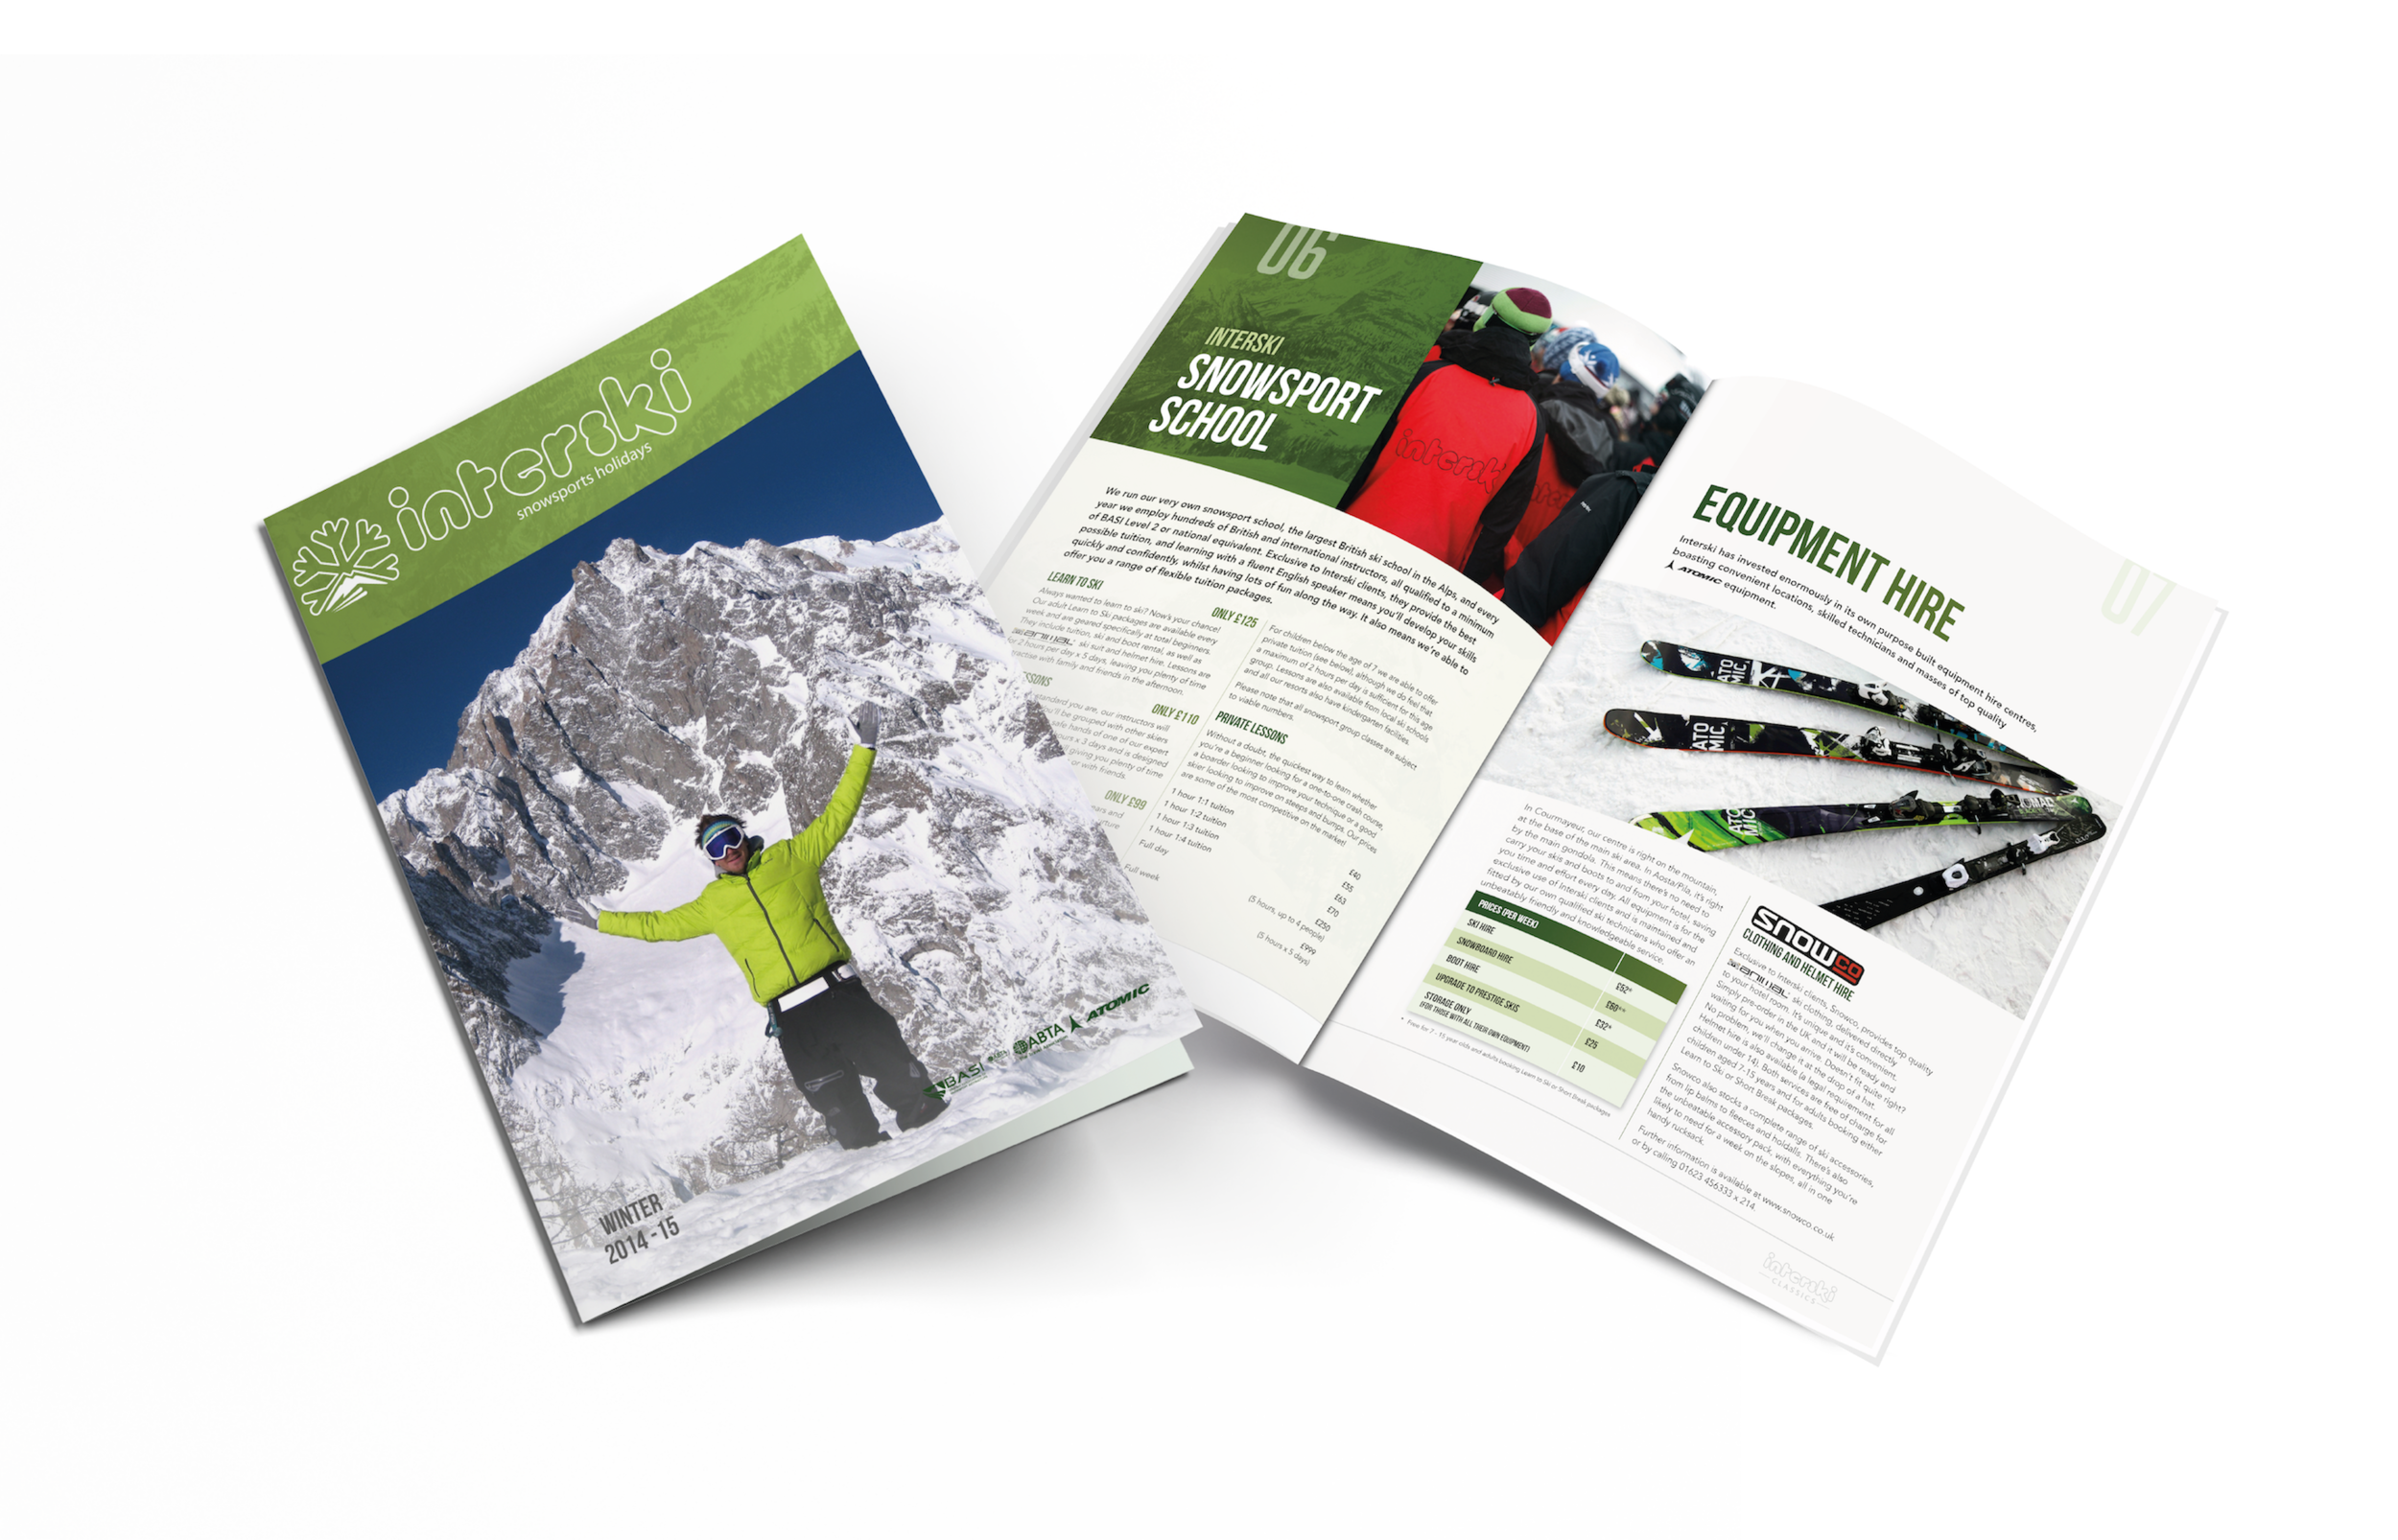 2014/15 Skiing Holiday Brochure Design for Interski, a Snowsports Holiday Company  (Copy)